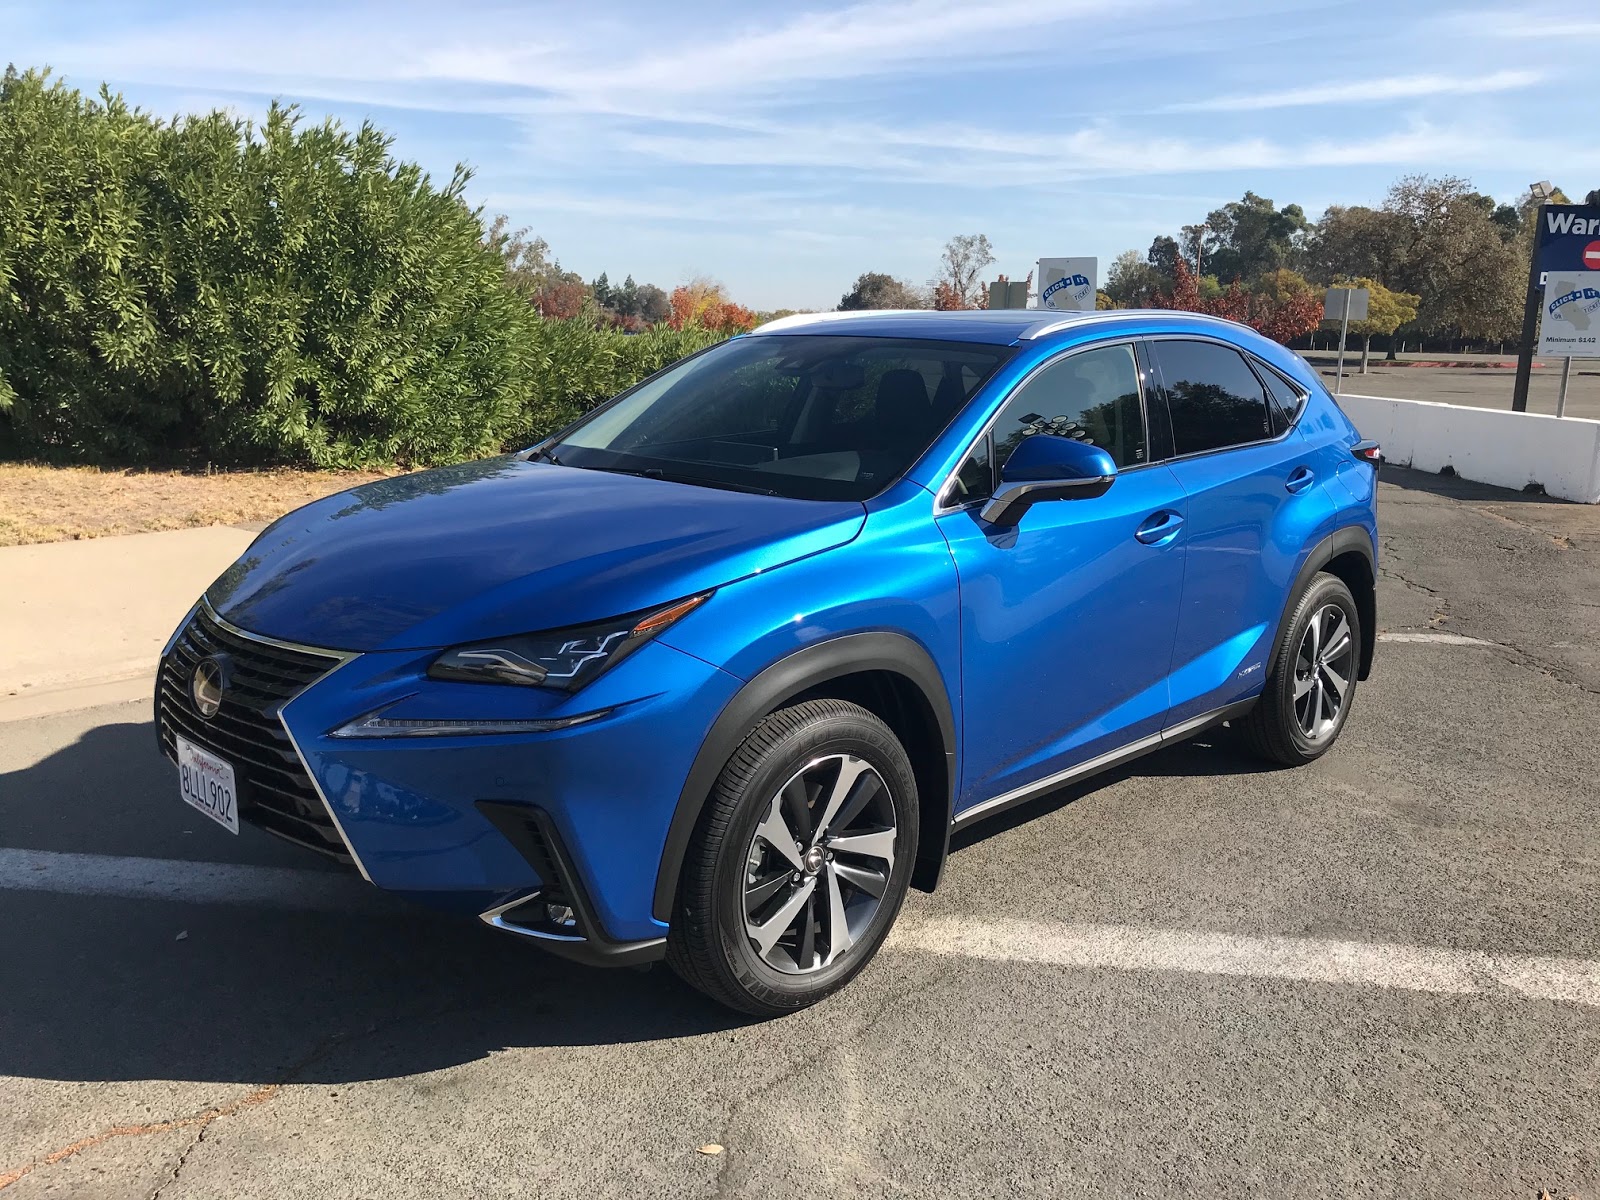 compact-is-the-new-mid-size-the-2020-lexus-nx-300h